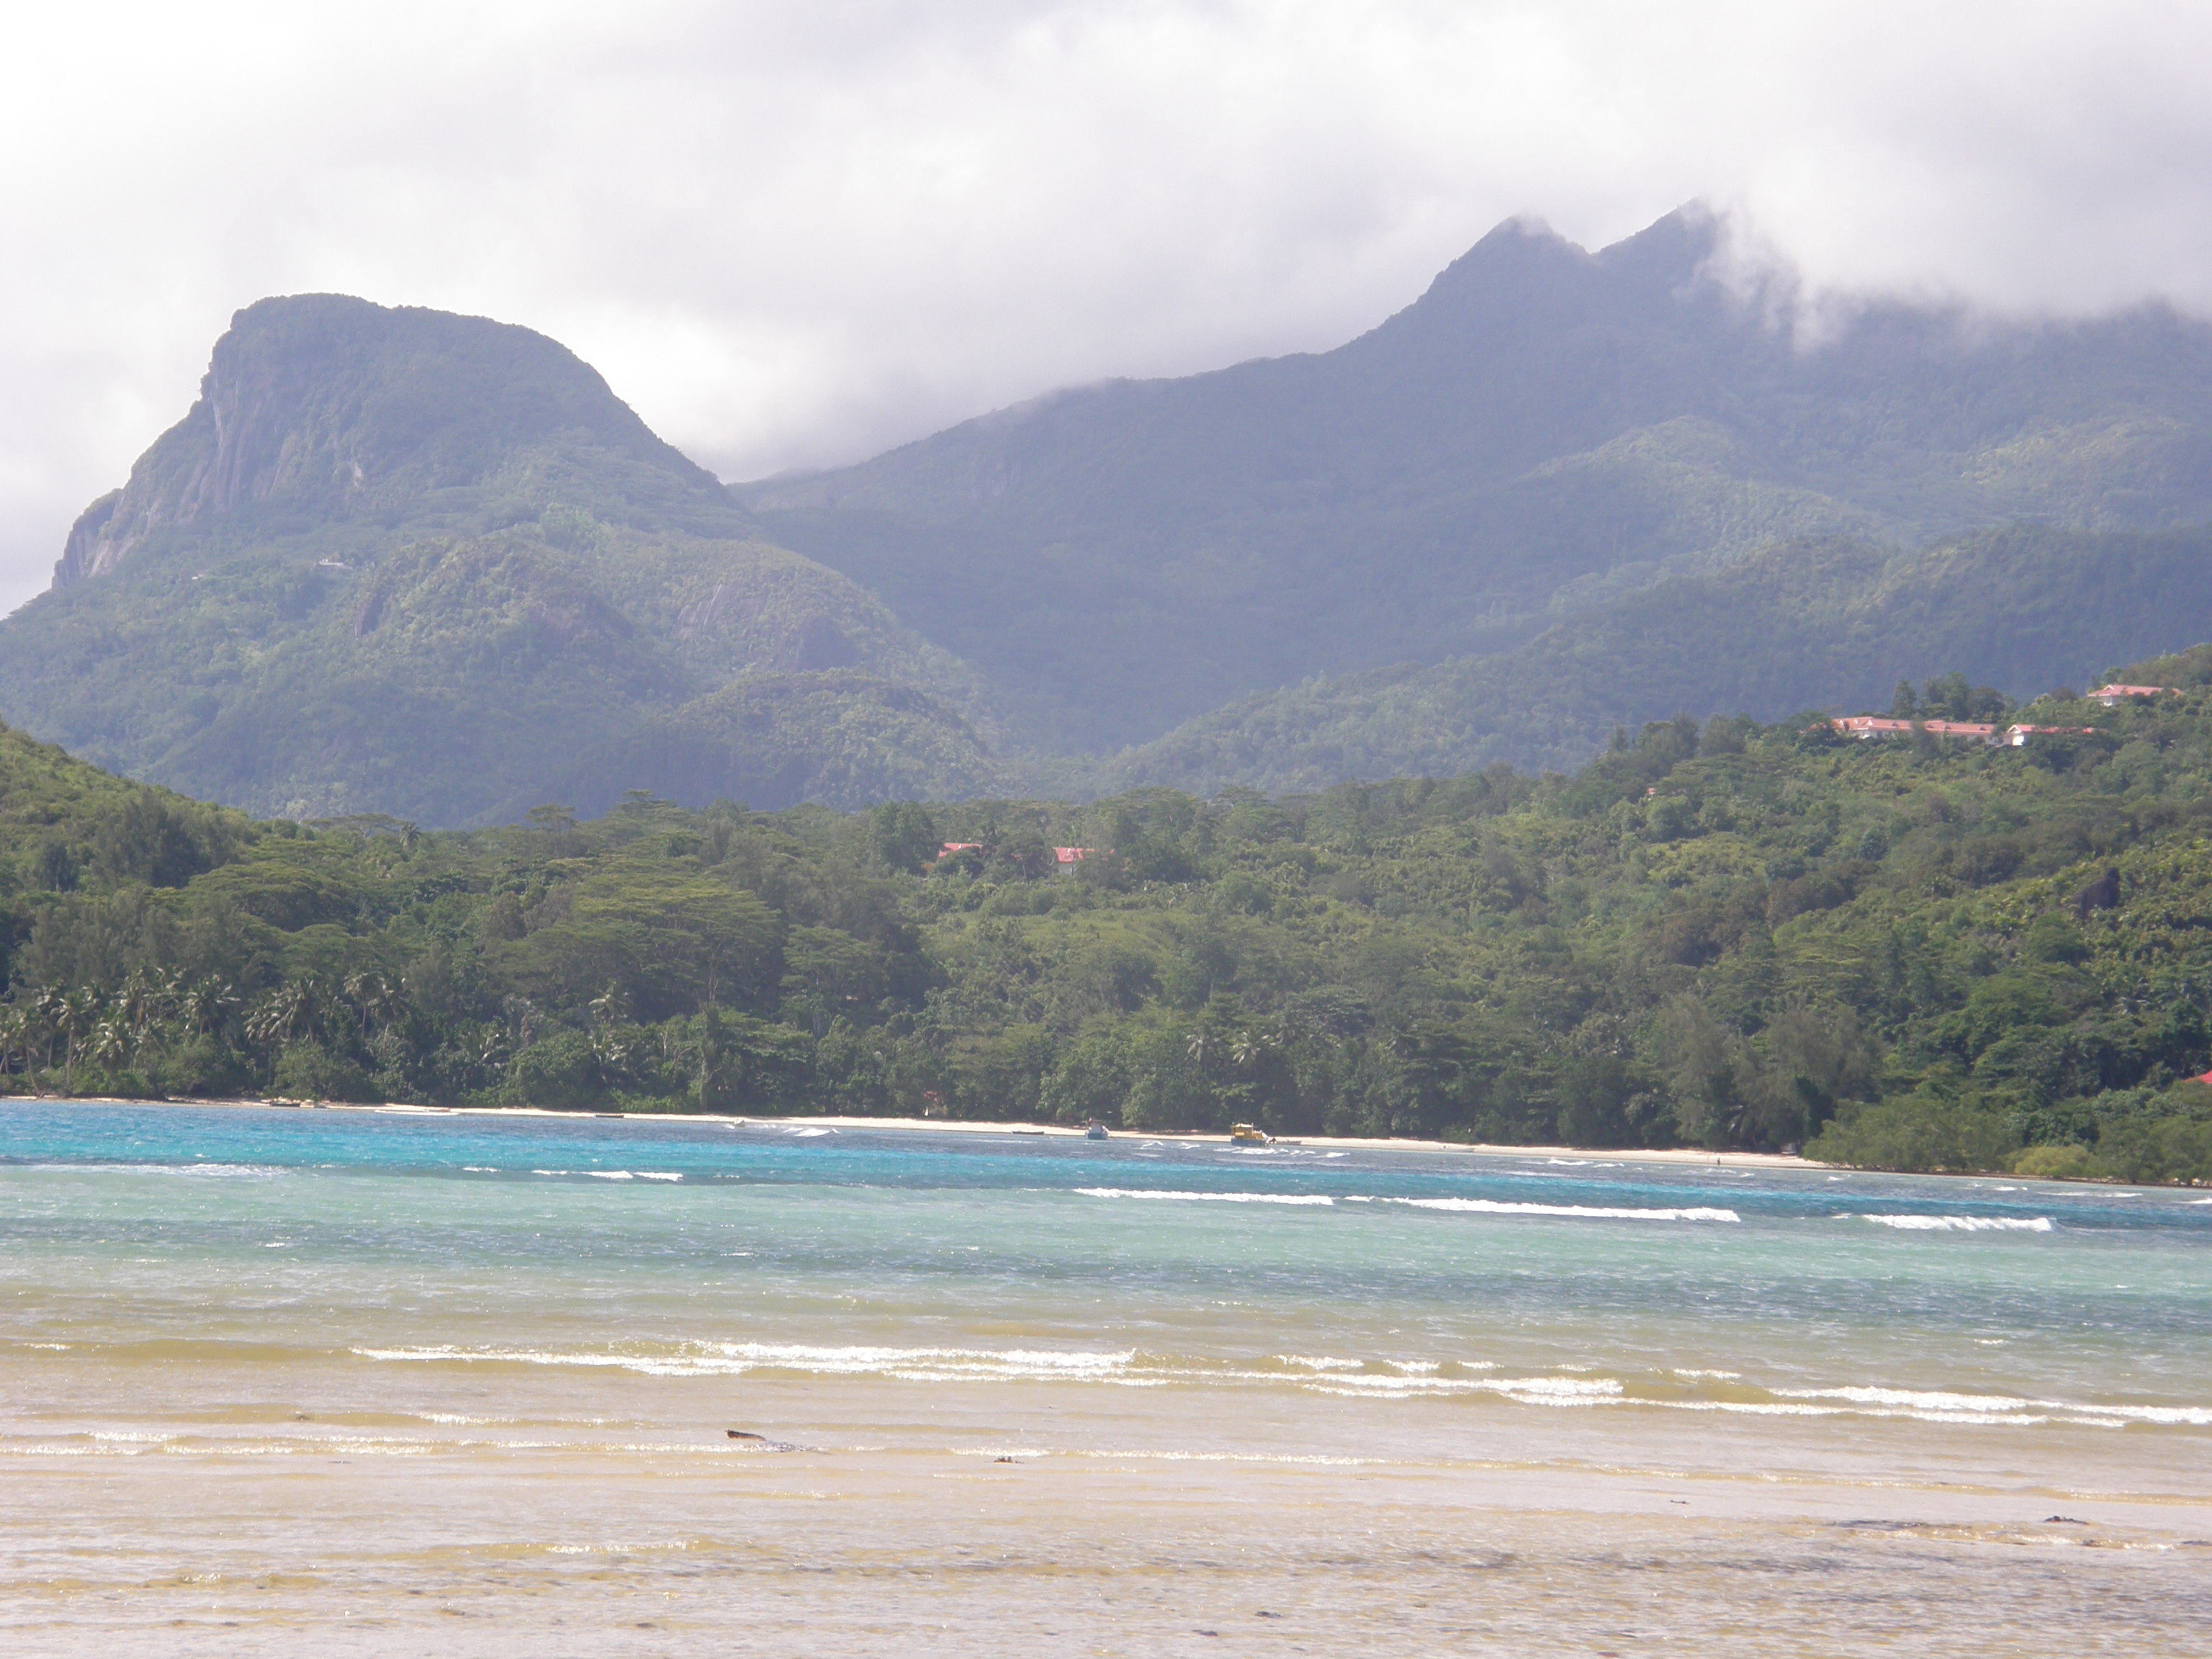 Le Morne Blanc and Morne Seychellois seen from Anse Boileau